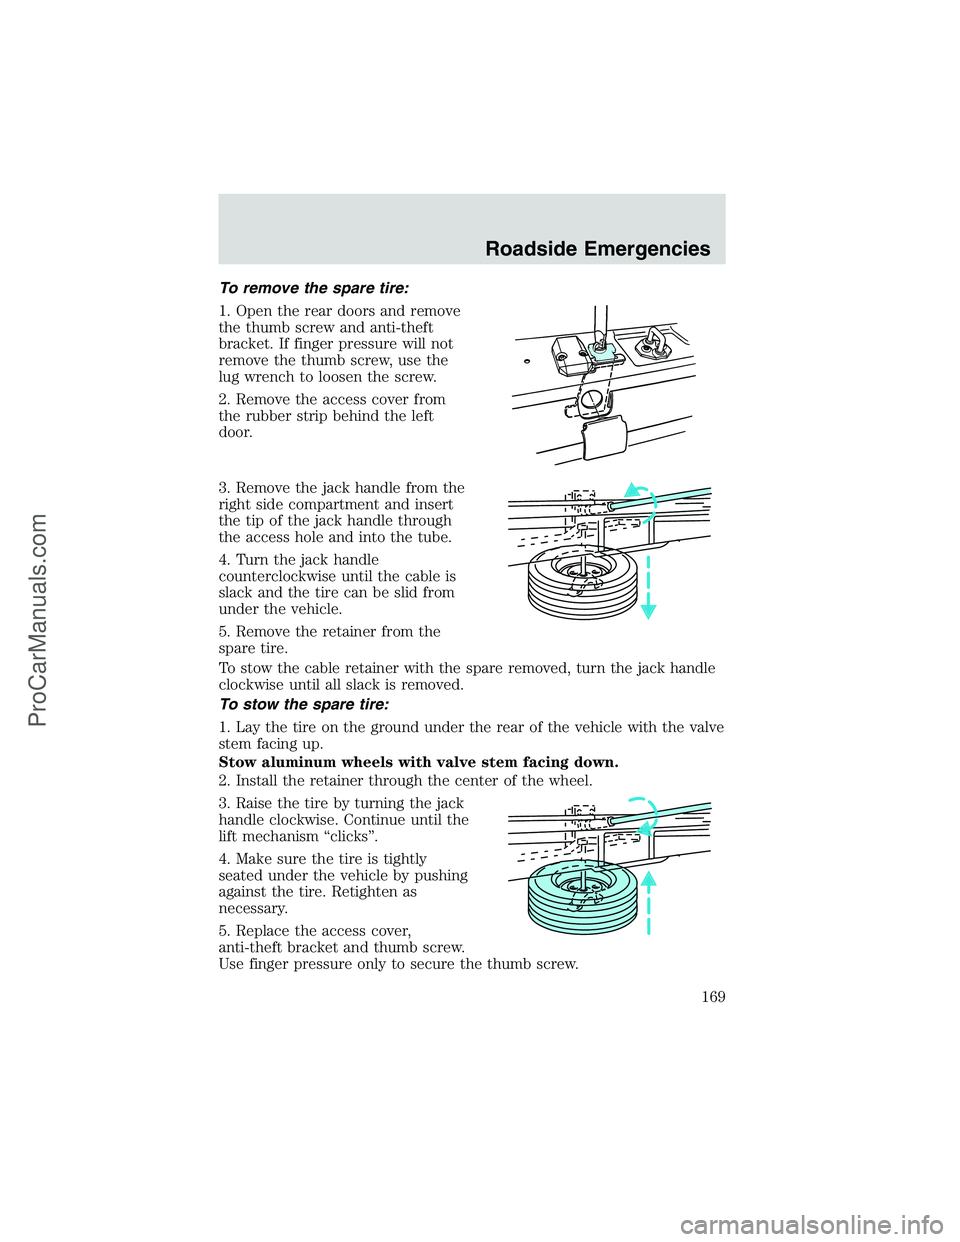 FORD E-150 2002  Owners Manual To remove the spare tire:
1. Open the rear doors and remove
the thumb screw and anti-theft
bracket. If finger pressure will not
remove the thumb screw, use the
lug wrench to loosen the screw.
2. Remov